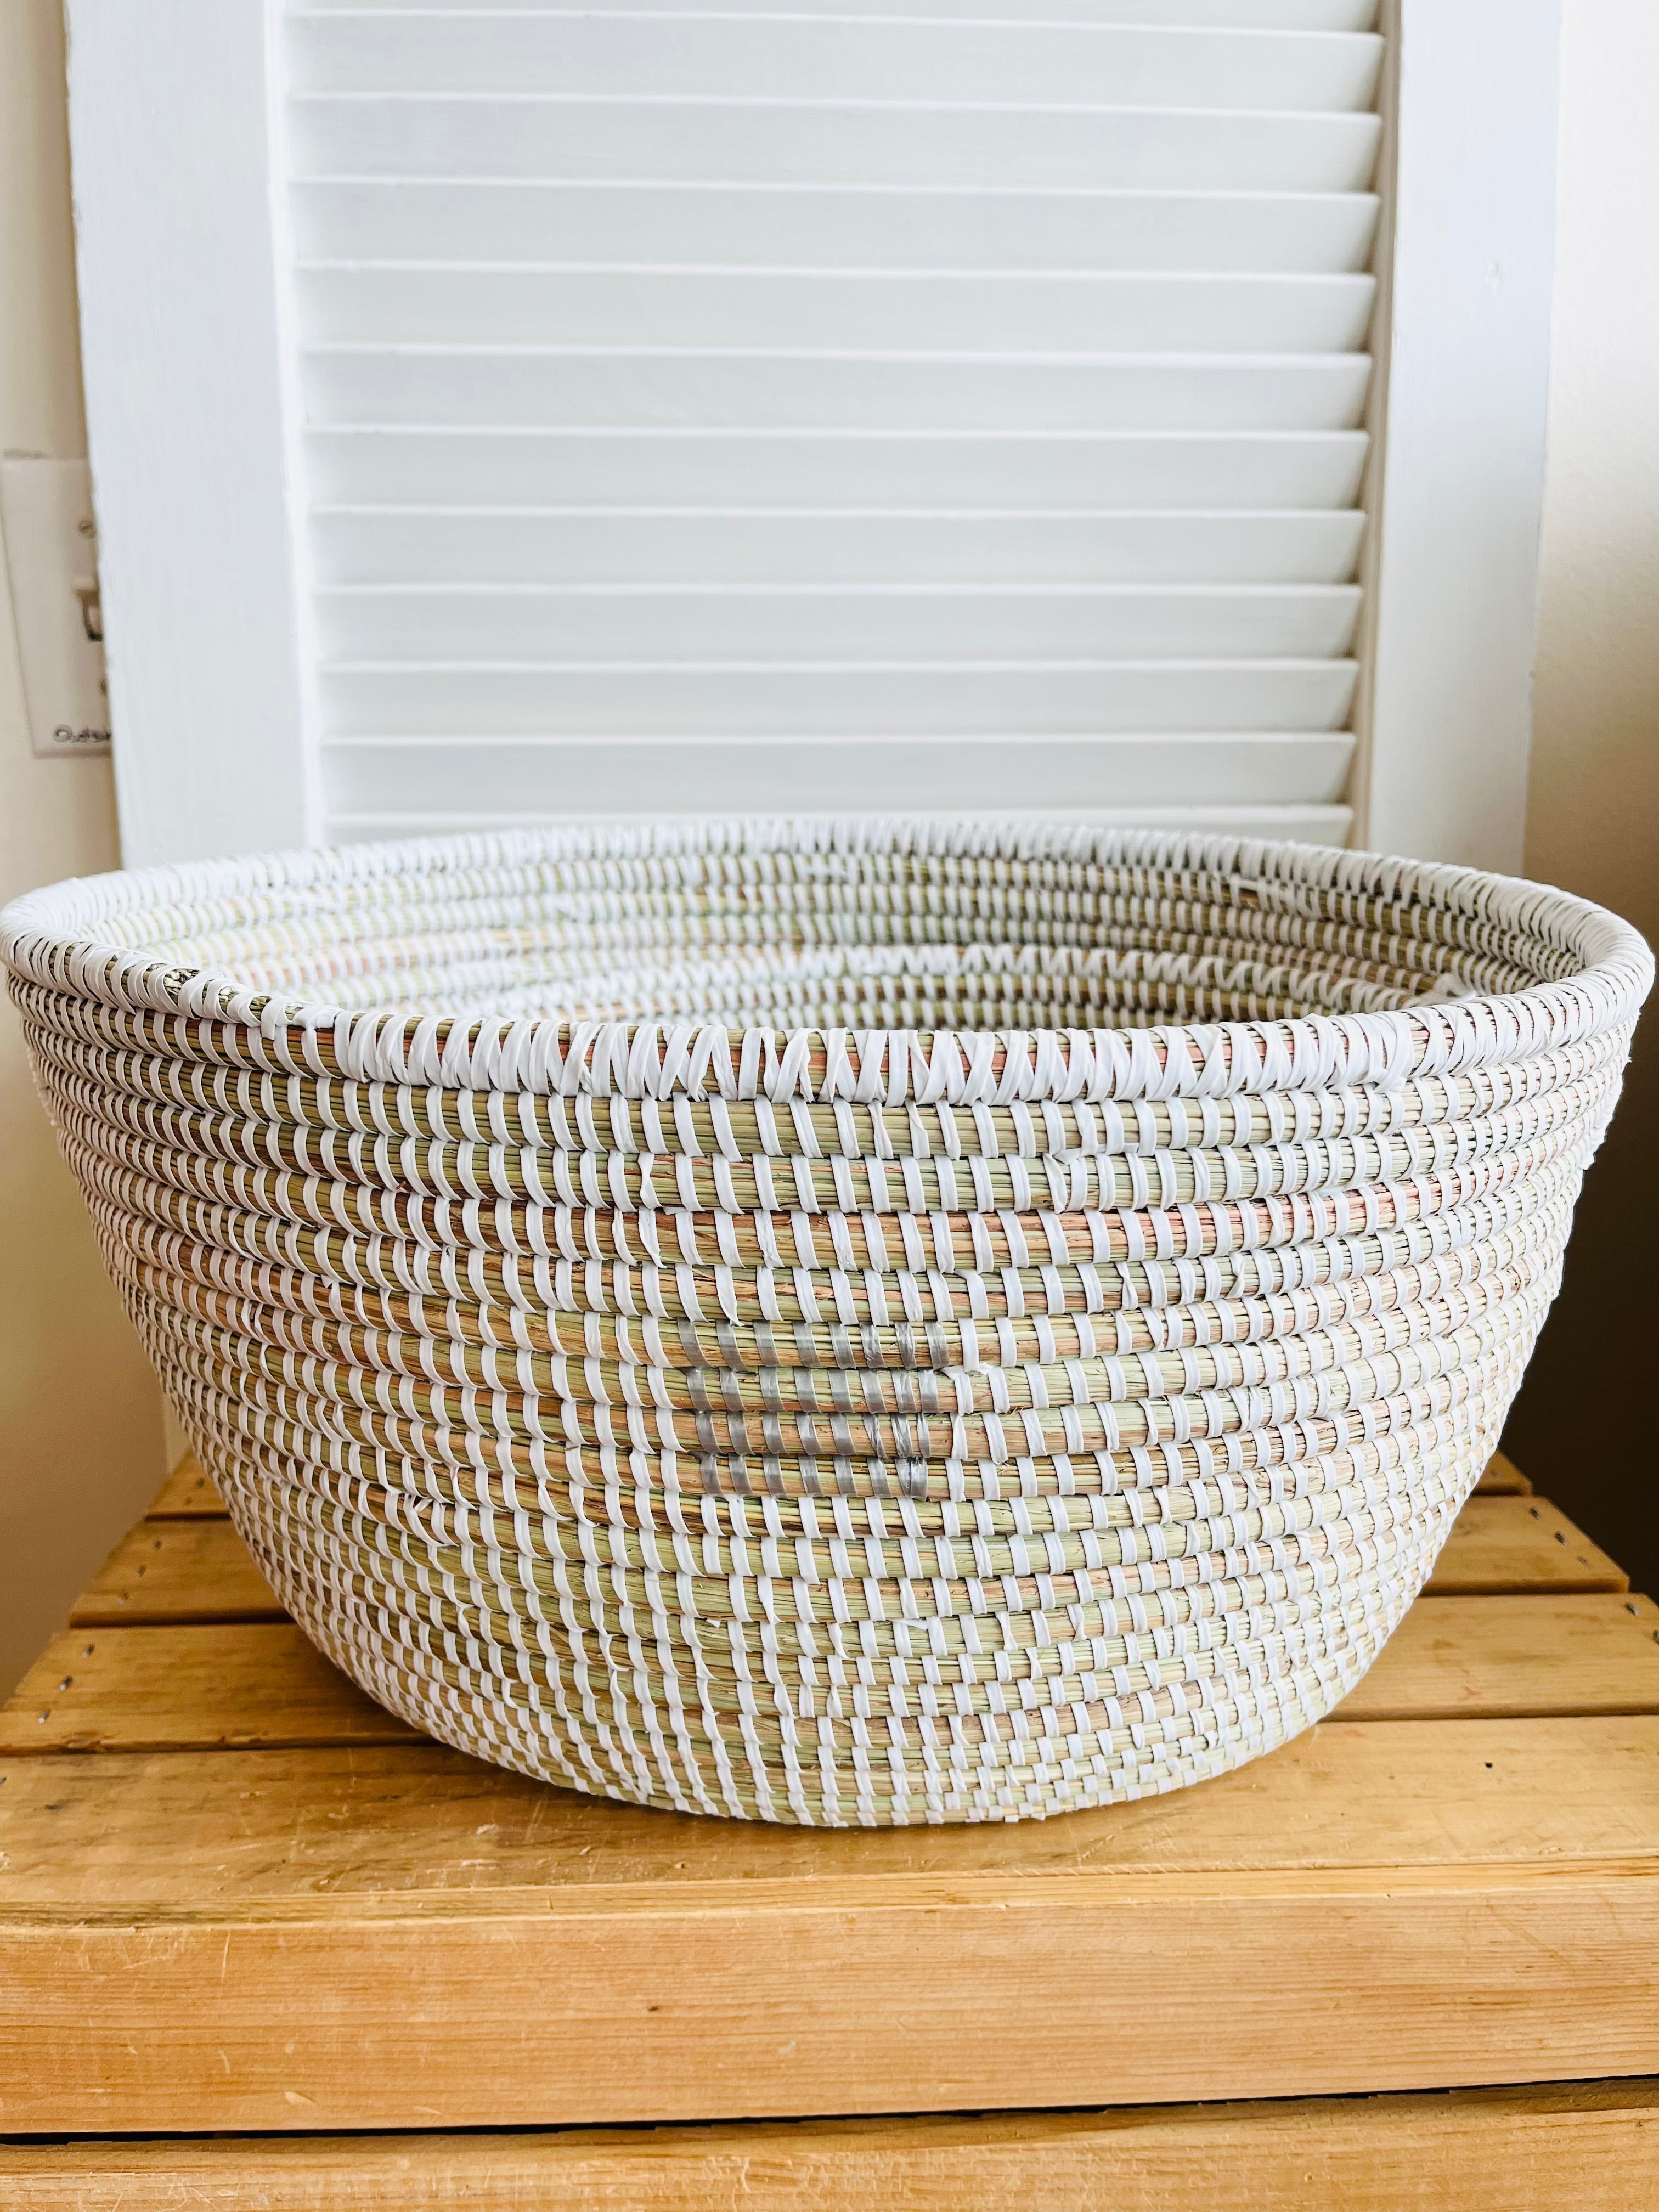 Medium White with Silver Dots - Prismatic Pixels - Oval basket